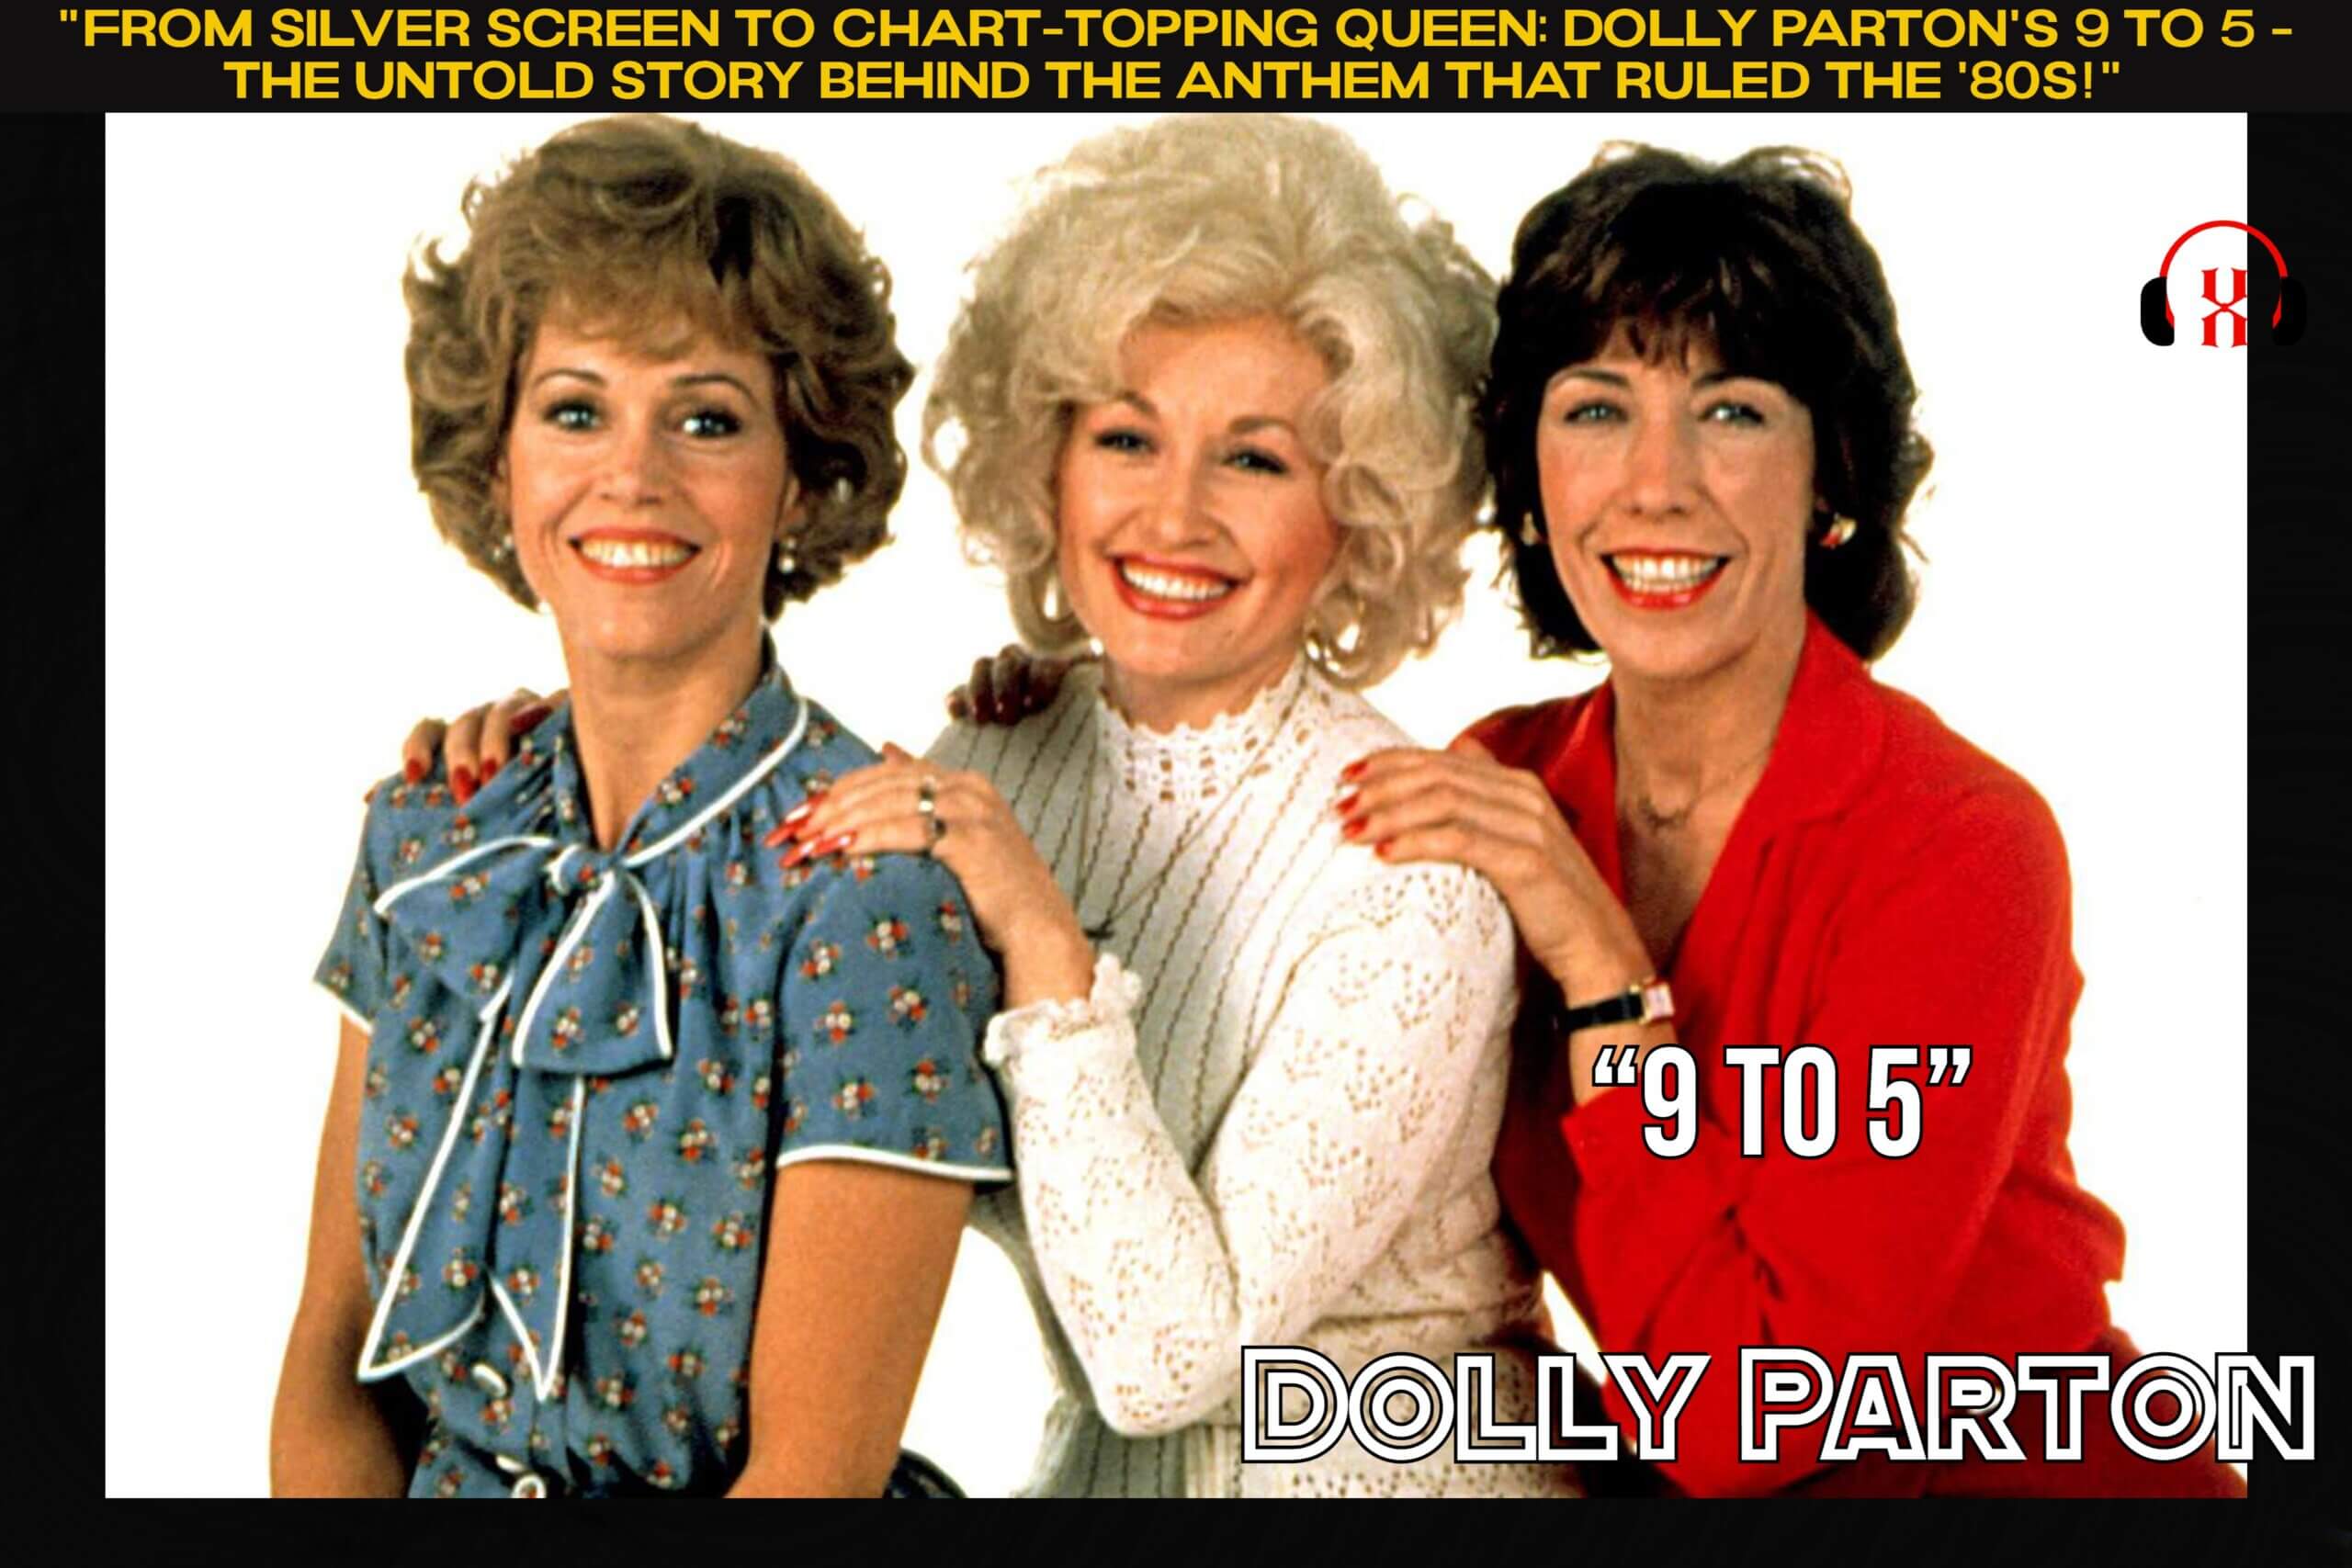 “From Silver Screen to Chart-Topping Queen: Dolly Parton’s 9 to 5 – The Untold Story Behind the Anthem That Ruled the ’80s!”